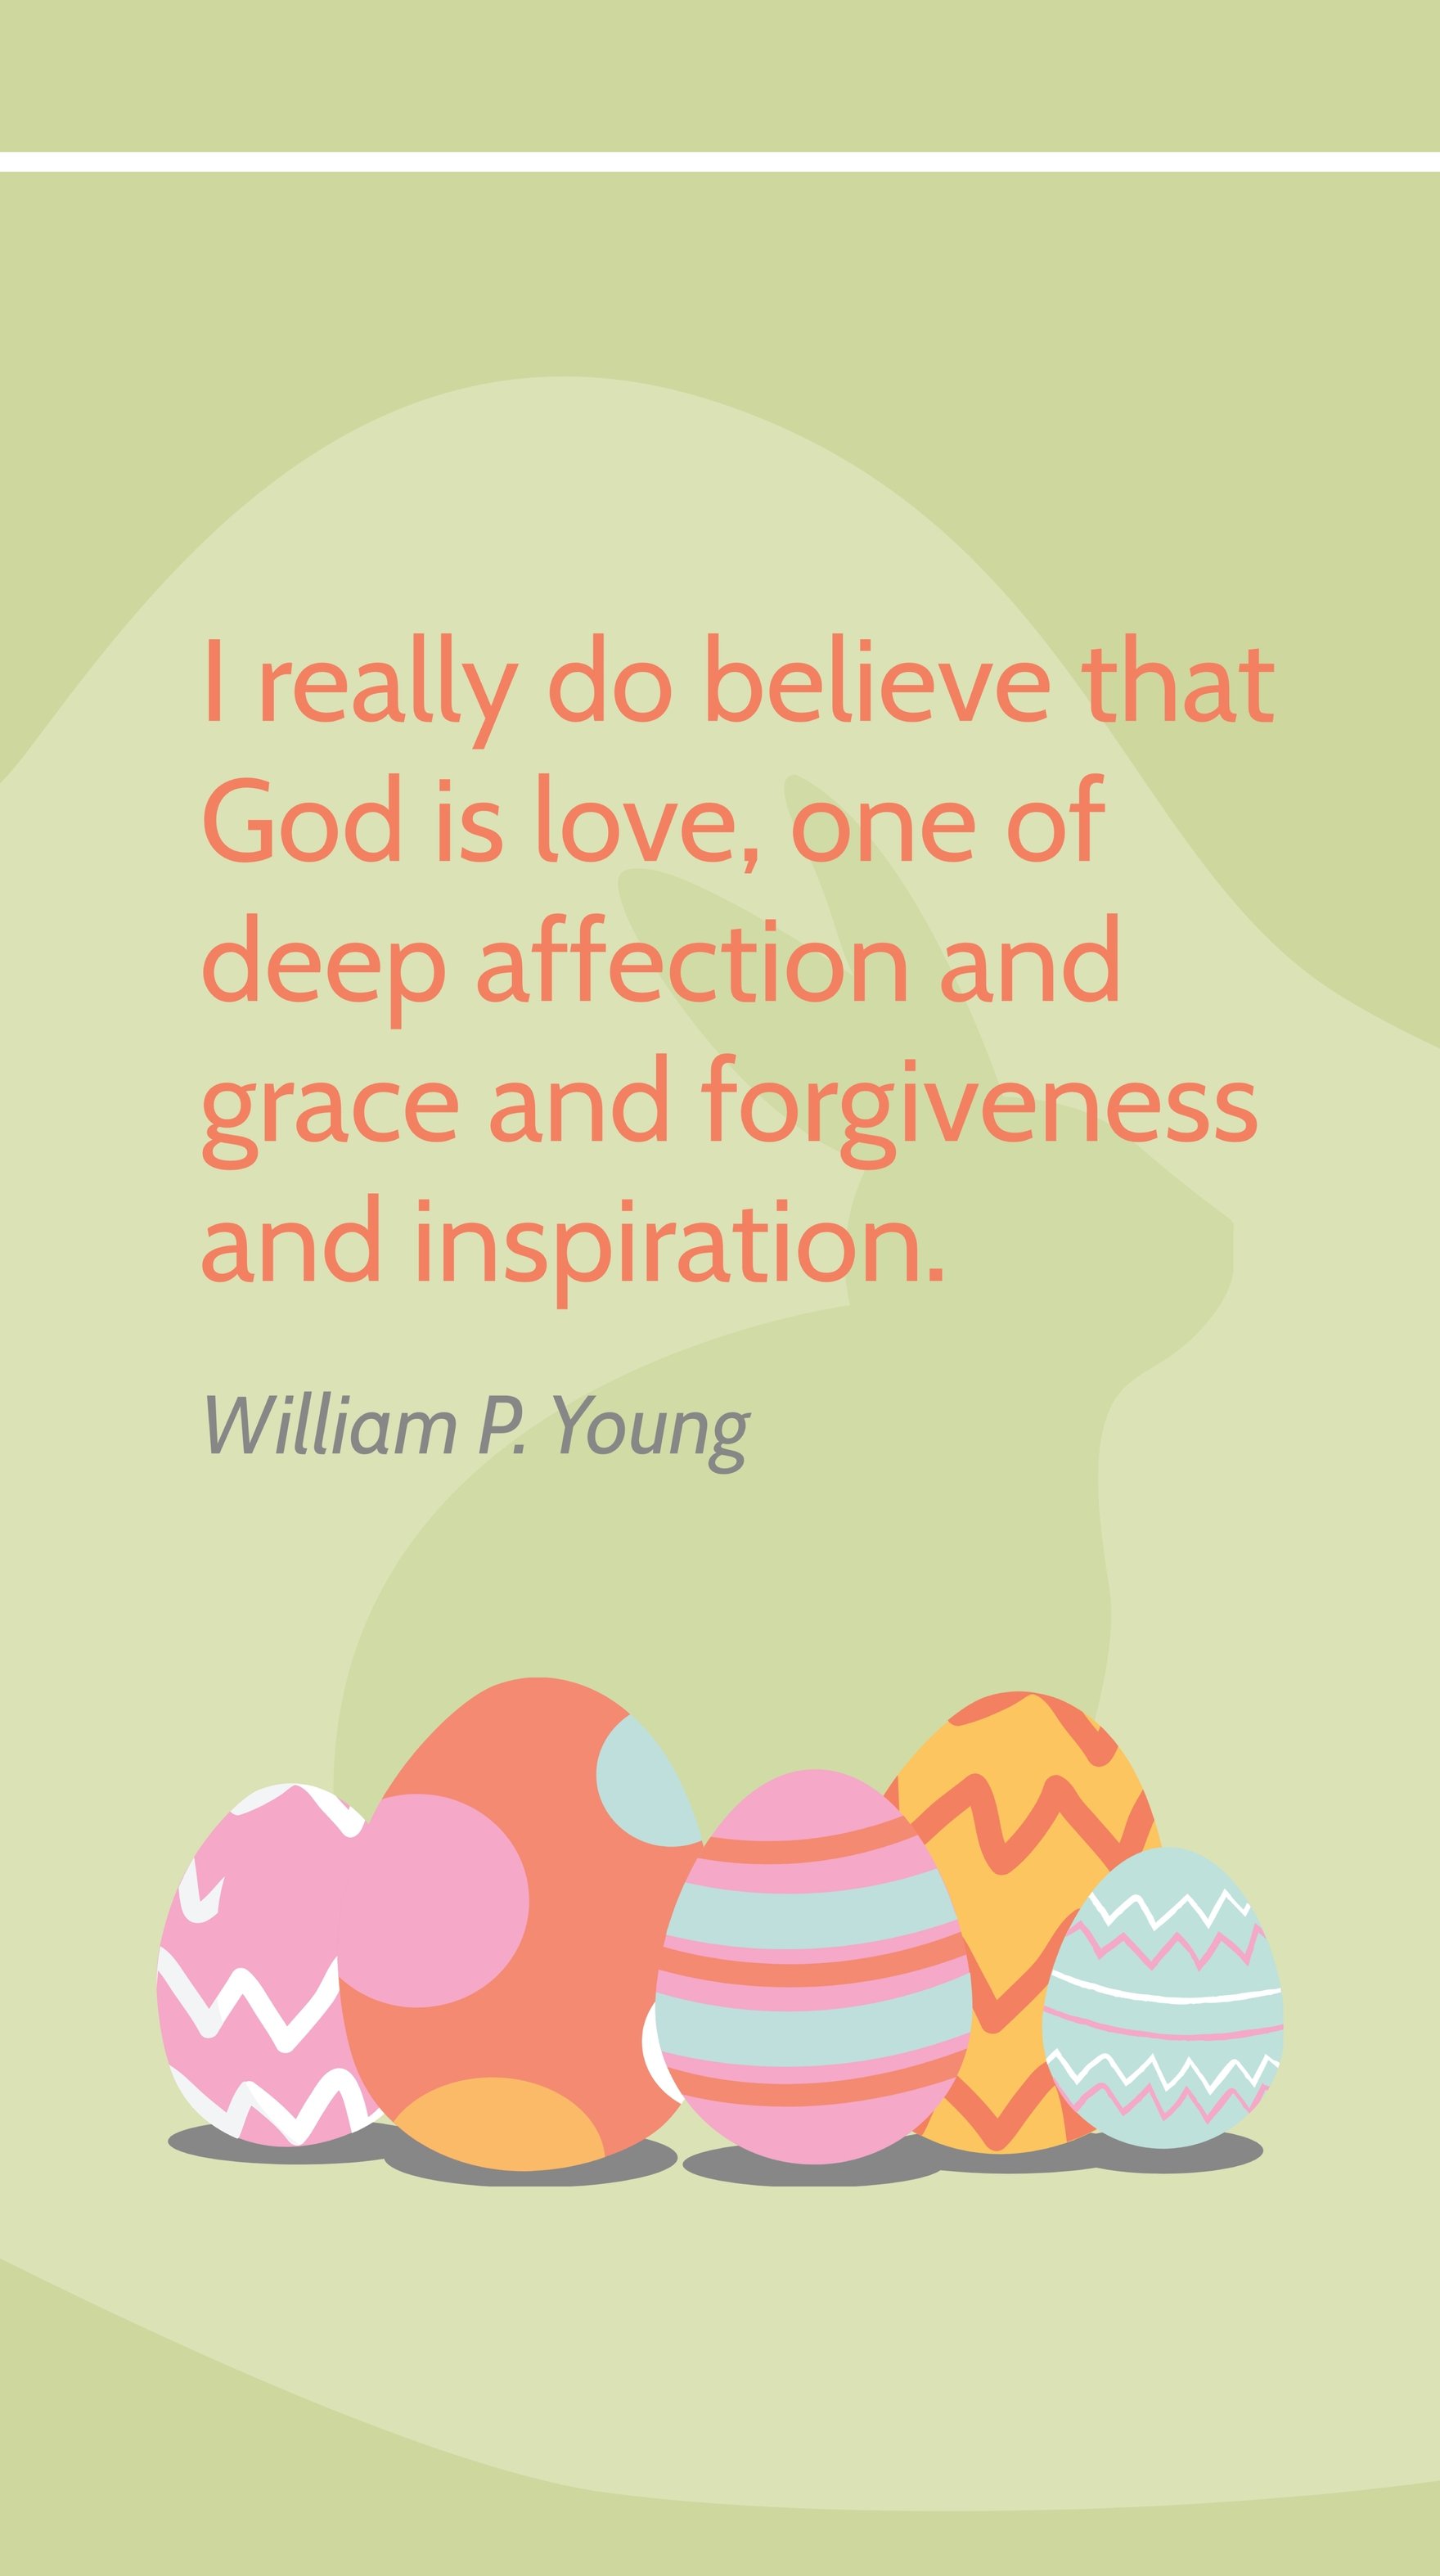 William P. Young - I really do believe that God is love, one of deep affection and grace and forgiveness and inspiration.